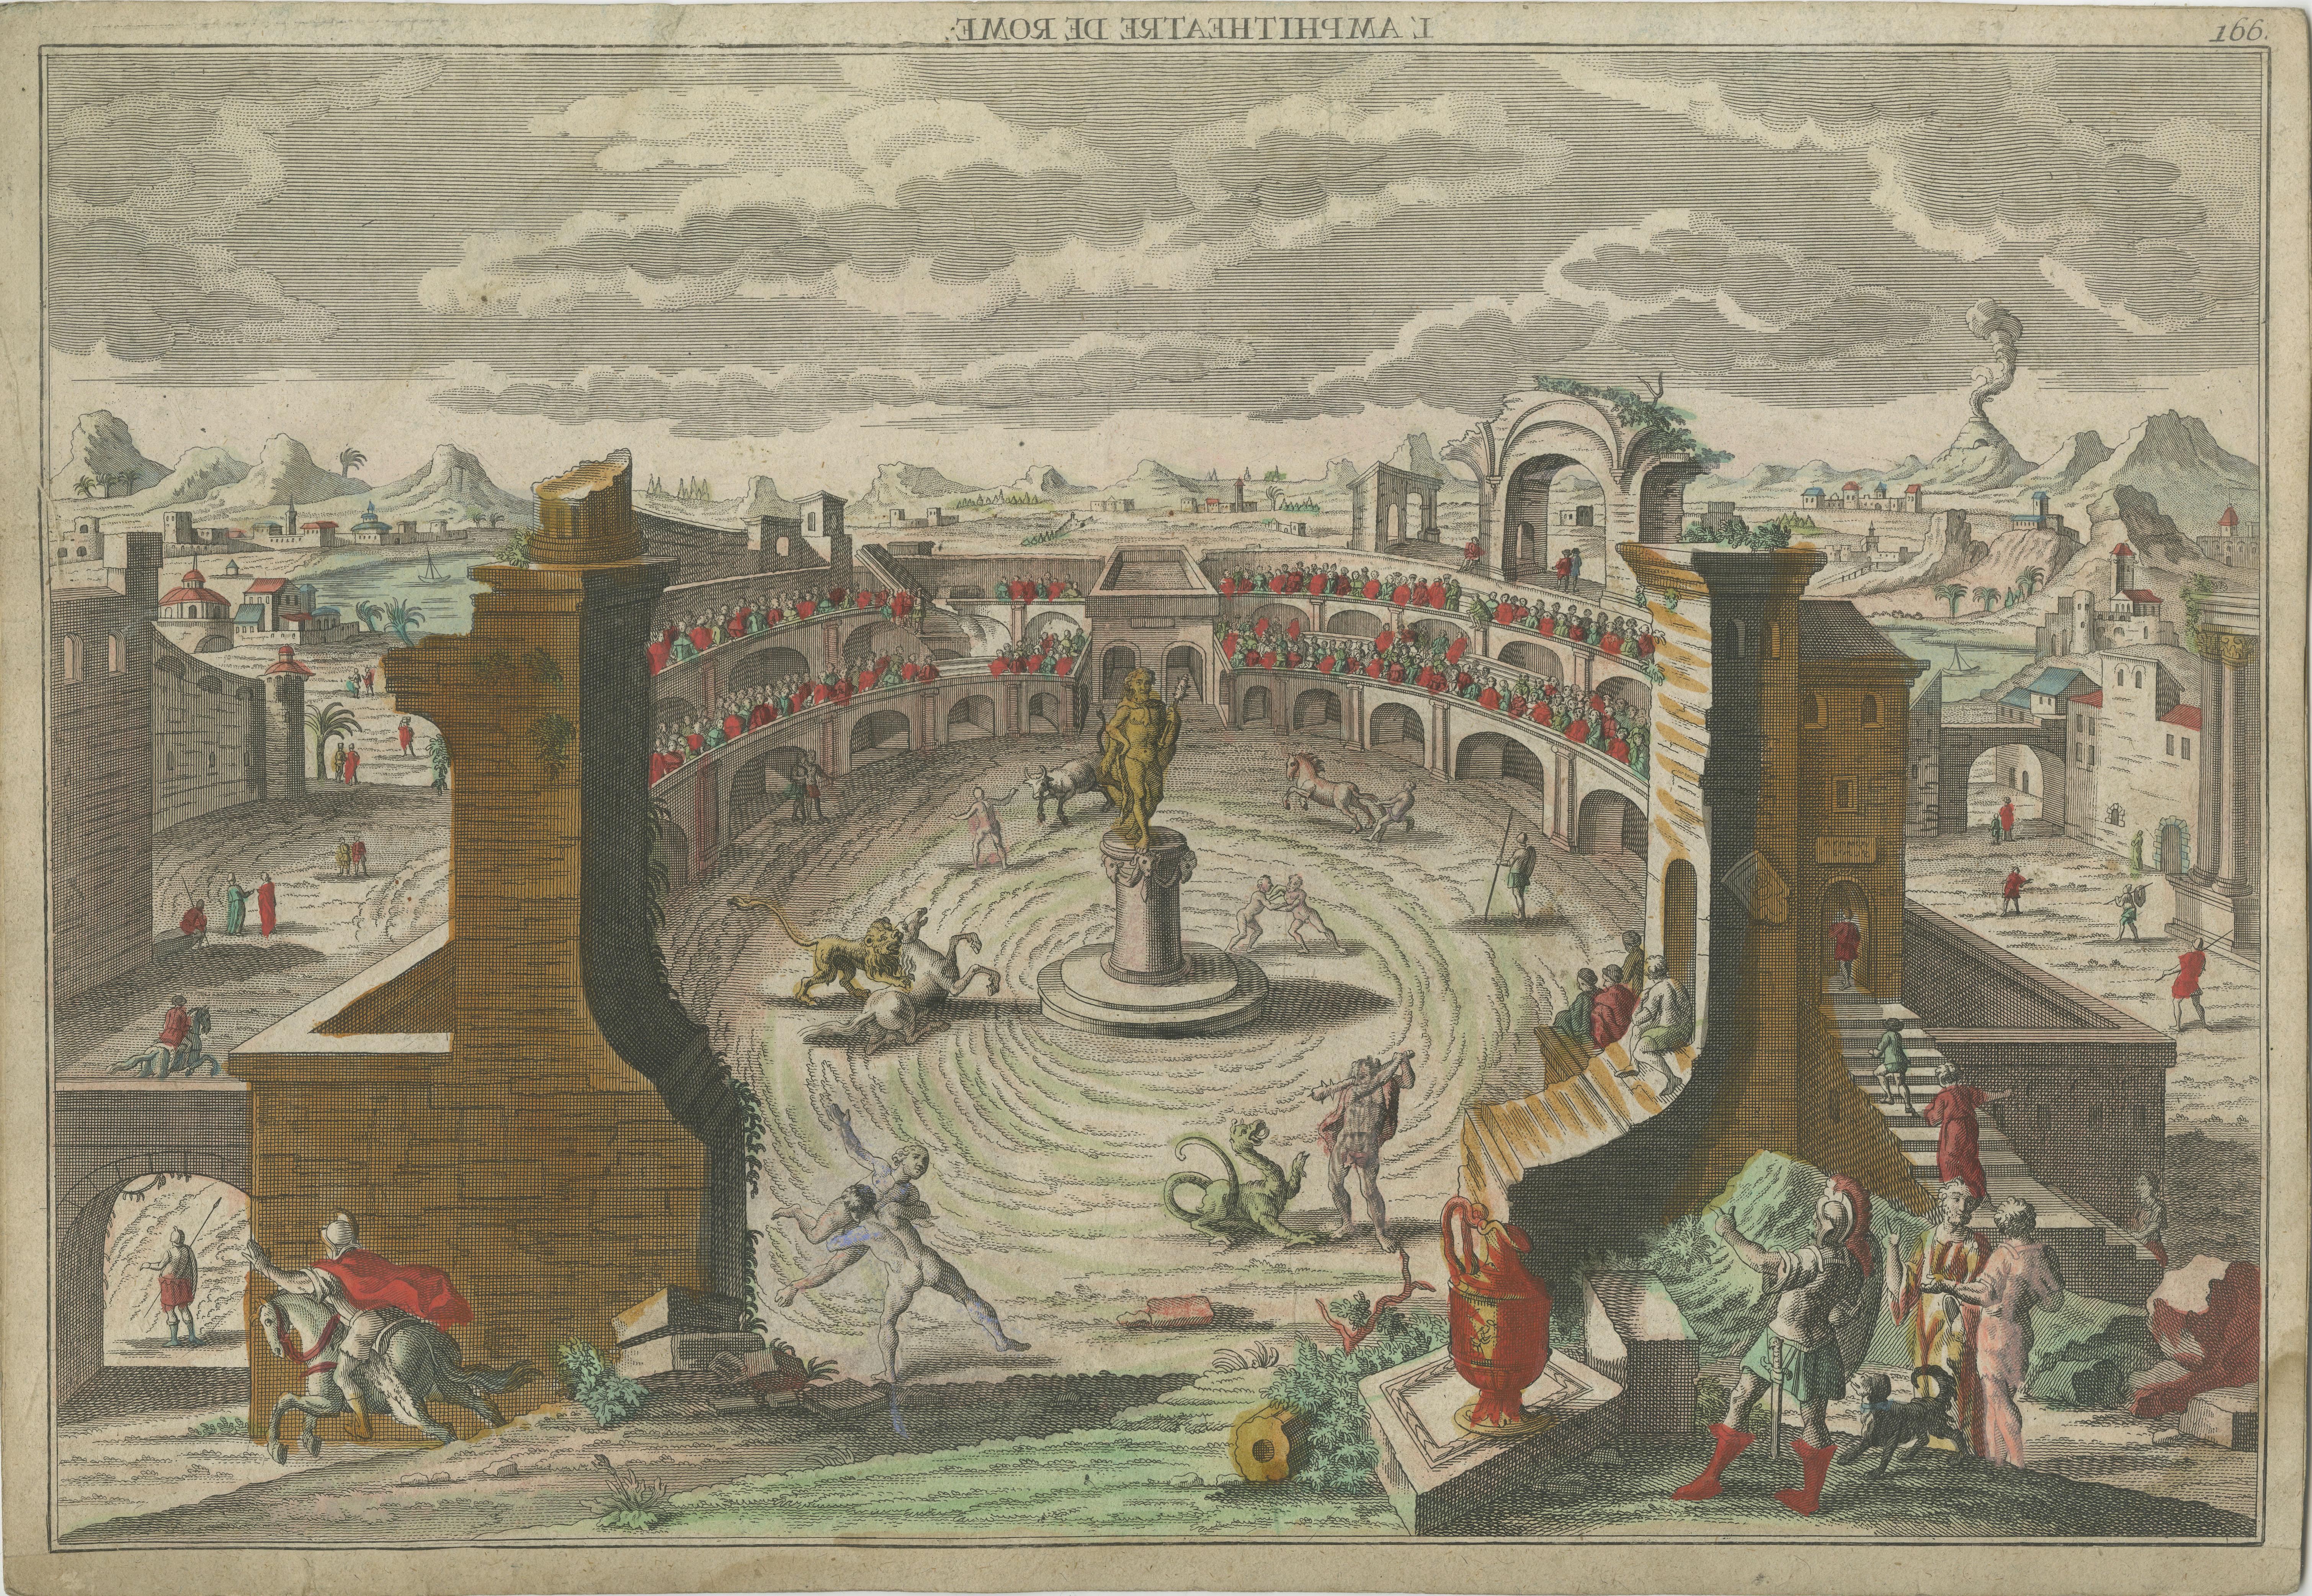 Antique print titled 'L'Amphitheatre de Rome'. A vue d'optique of a Roman amphitheatre. This is an optical print, also called 'vue optique' or 'vue d'optique', which were made to be viewed through a Zograscope, or other devices of convex lens and